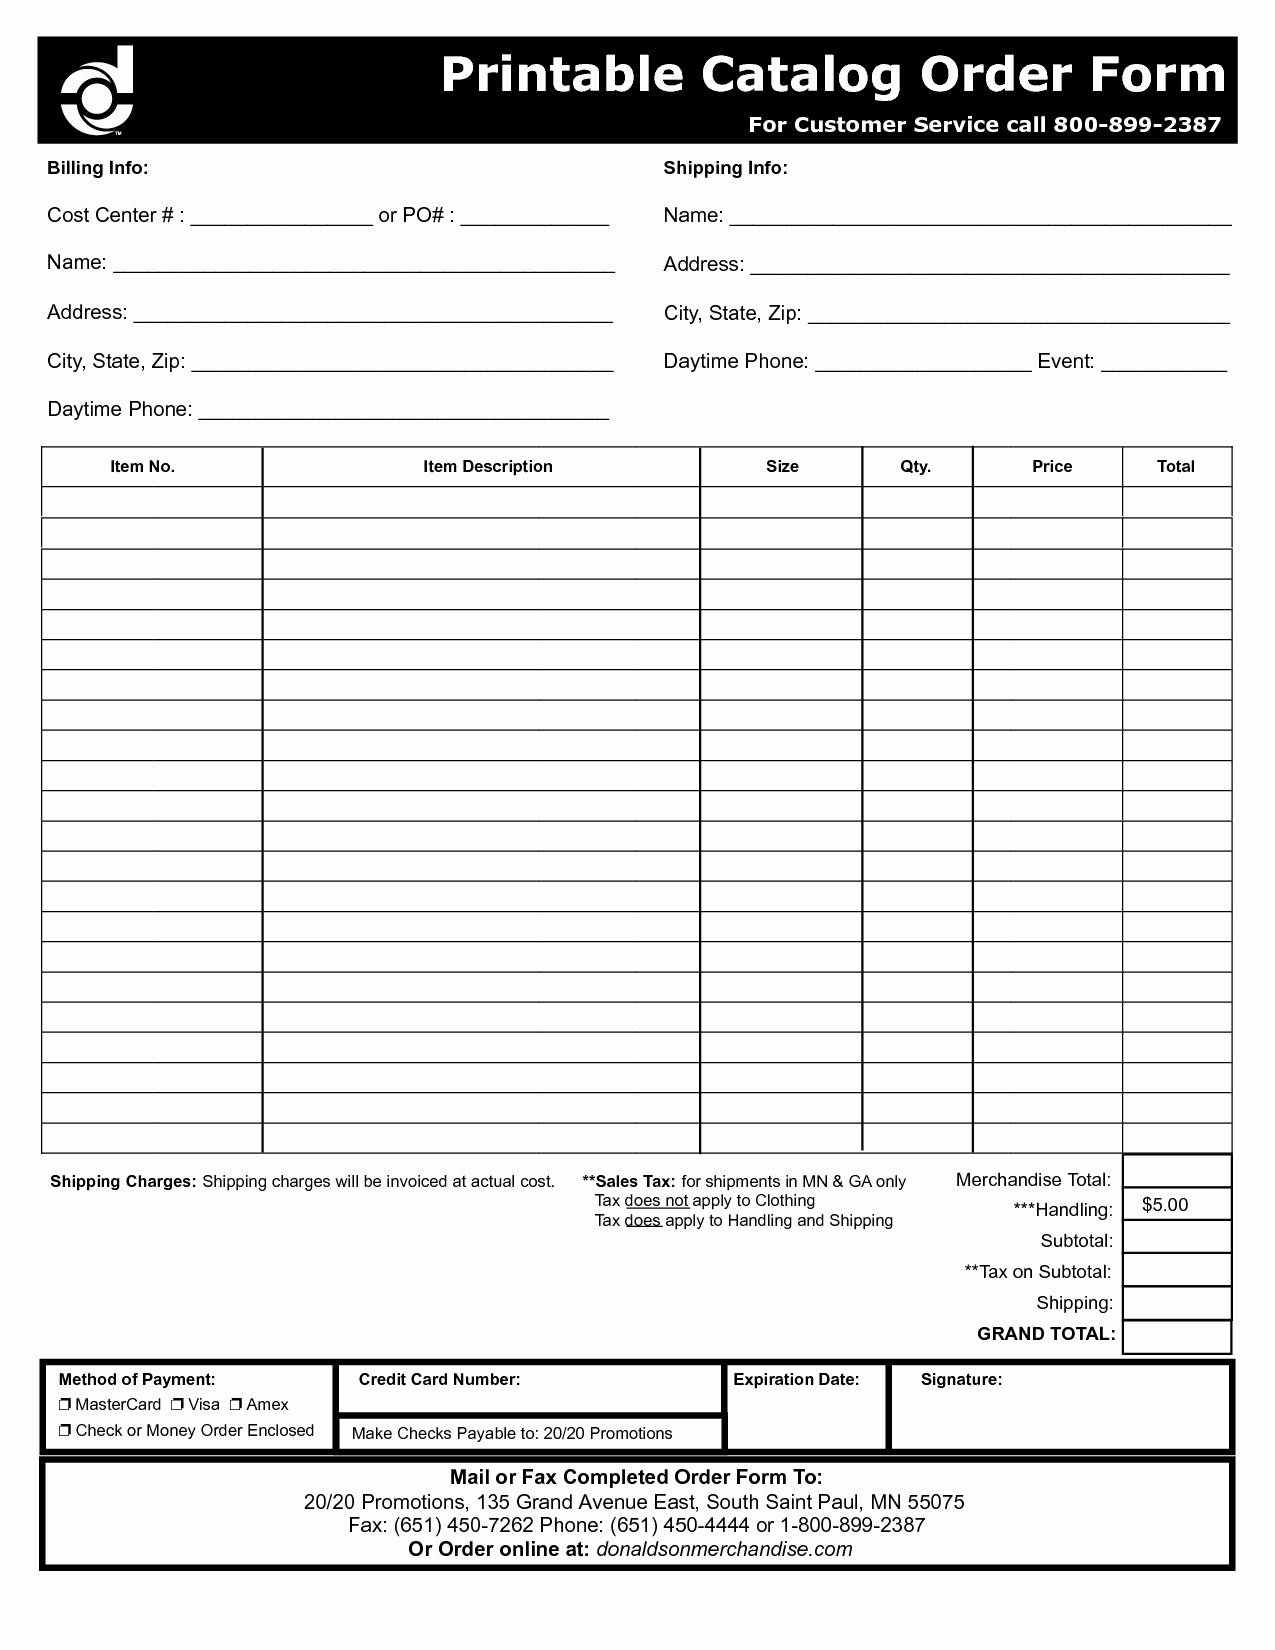 Printable order form Template Lovely Free order forms Printable Catalog order form